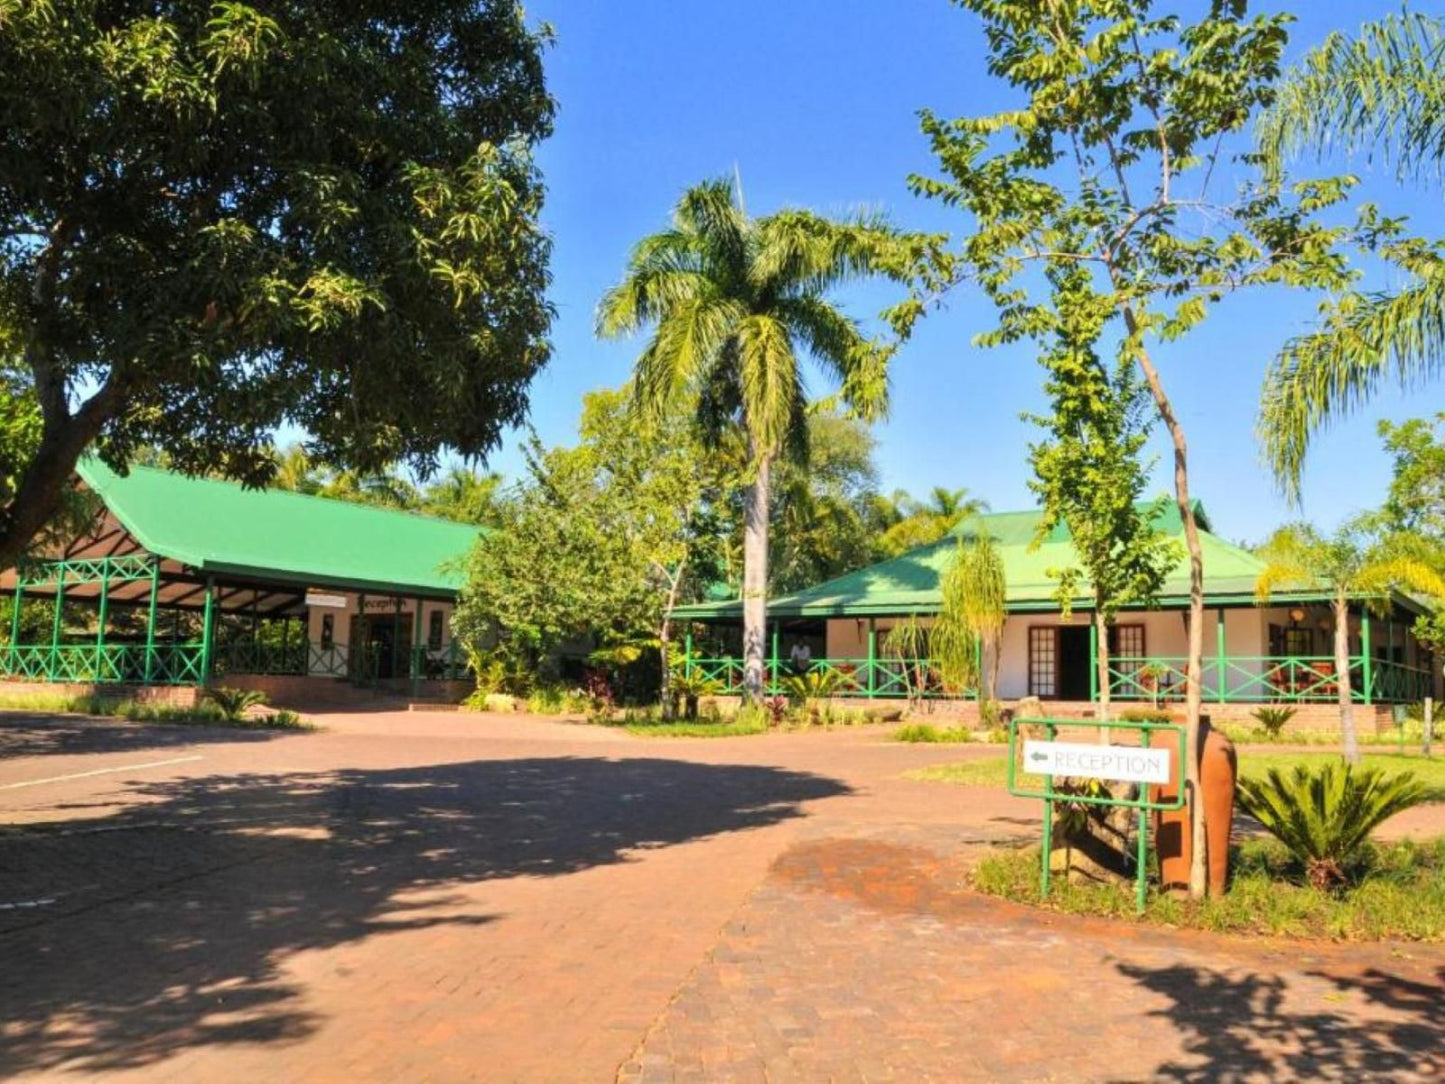 Tzaneen Country Lodge Tzaneen Limpopo Province South Africa Complementary Colors, Island, Nature, Palm Tree, Plant, Wood